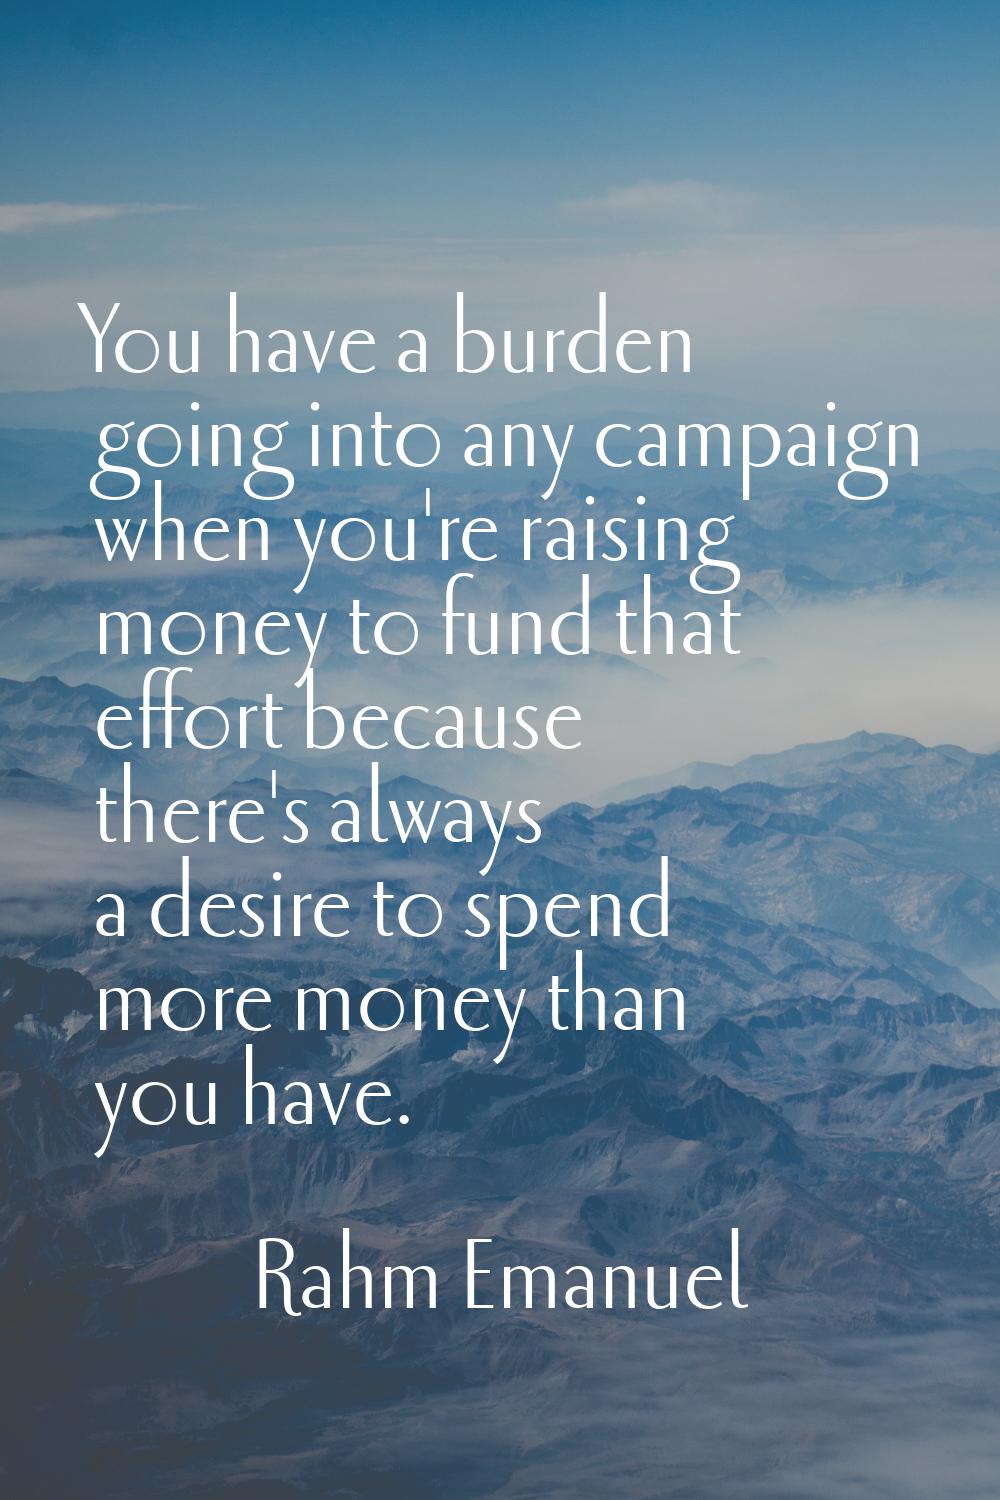 You have a burden going into any campaign when you're raising money to fund that effort because the